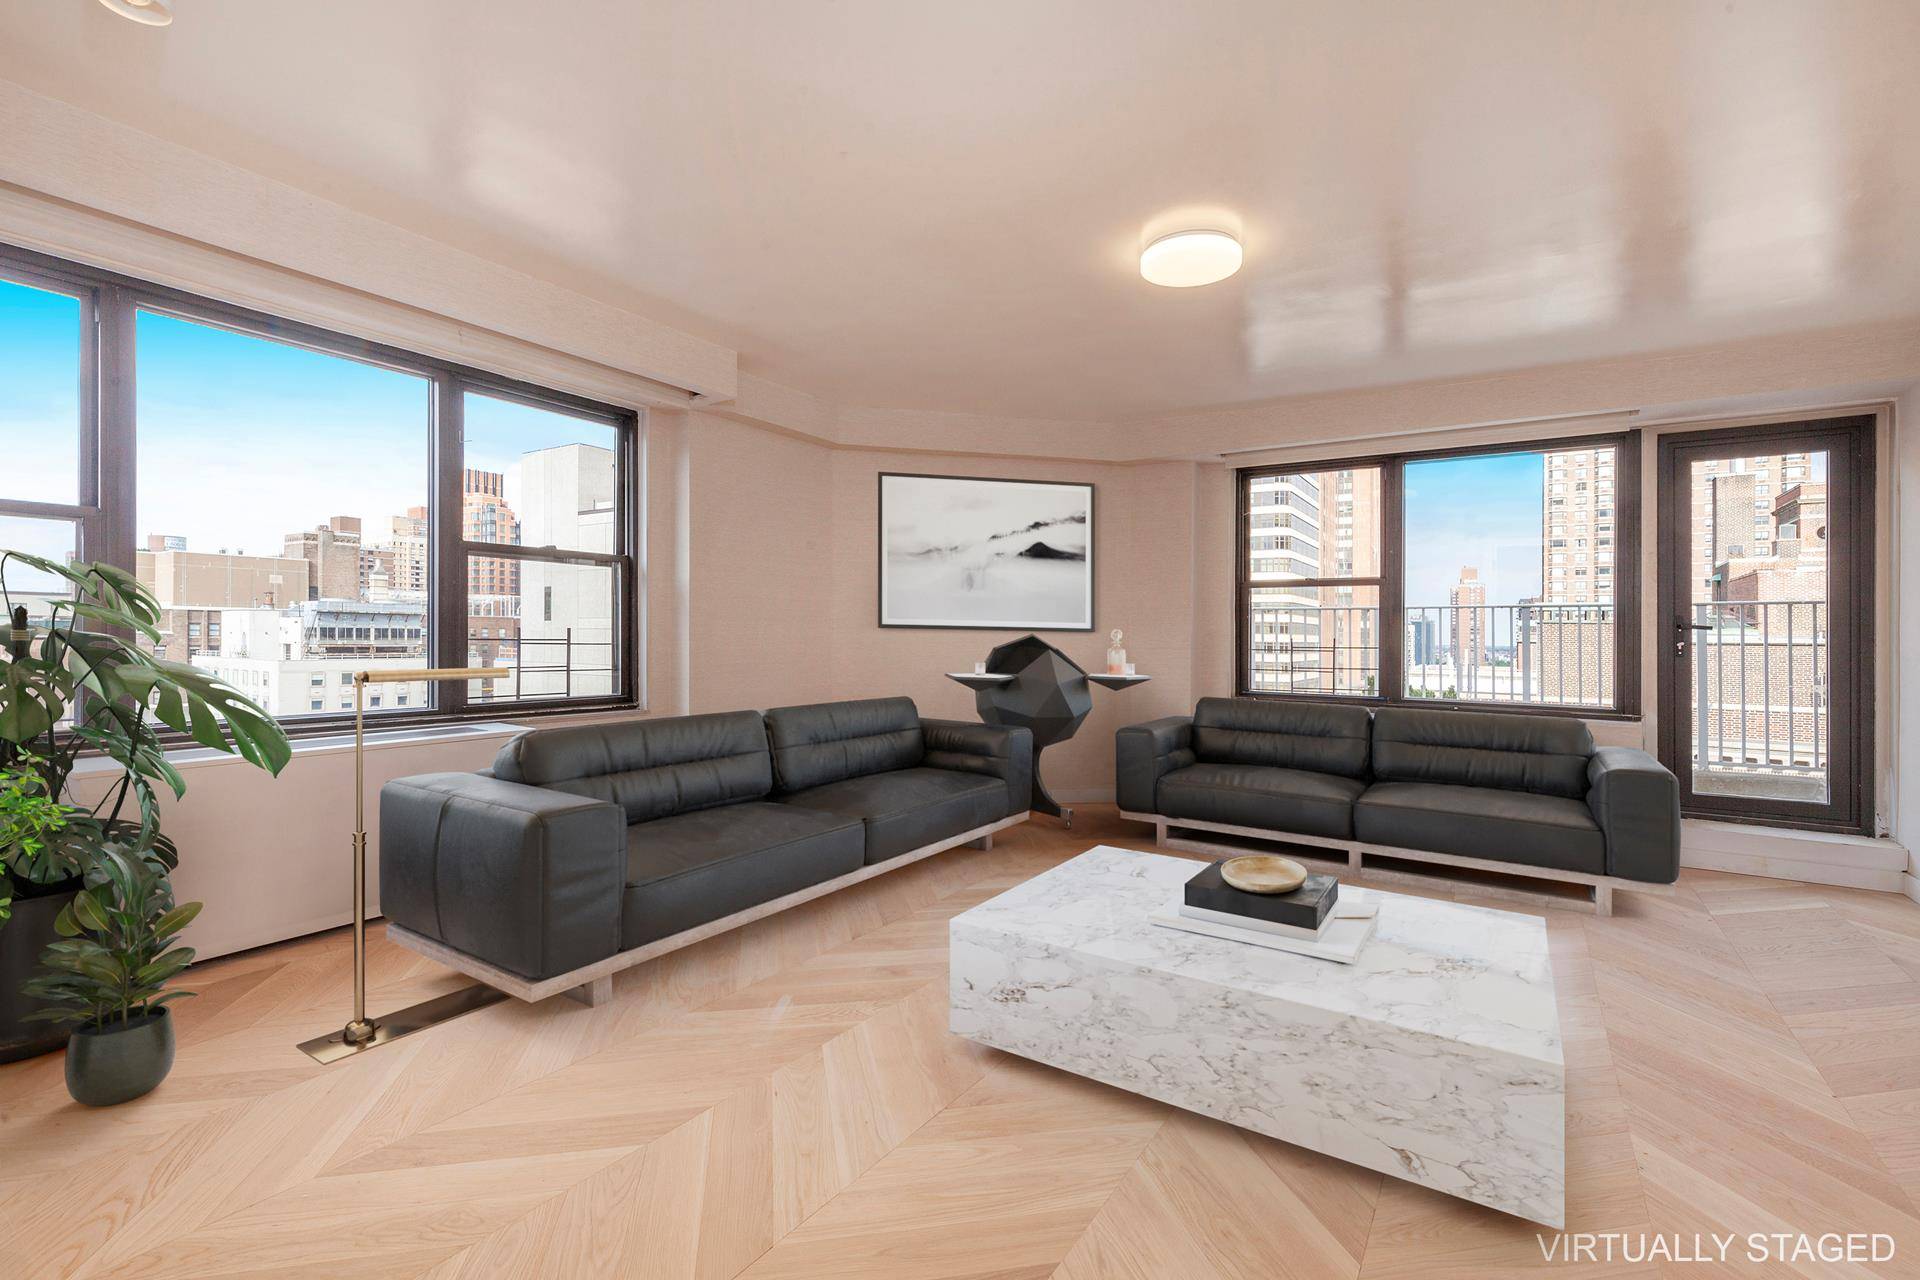 BEST DEAL IN THE UES. A FULLY GUT RENOVATED, TRIPLE MINT CONDITION CONDO on the SOUTHWEST Corner of LEXINGTON amp ; 90th Street comes a Unit that didn't miss a ...